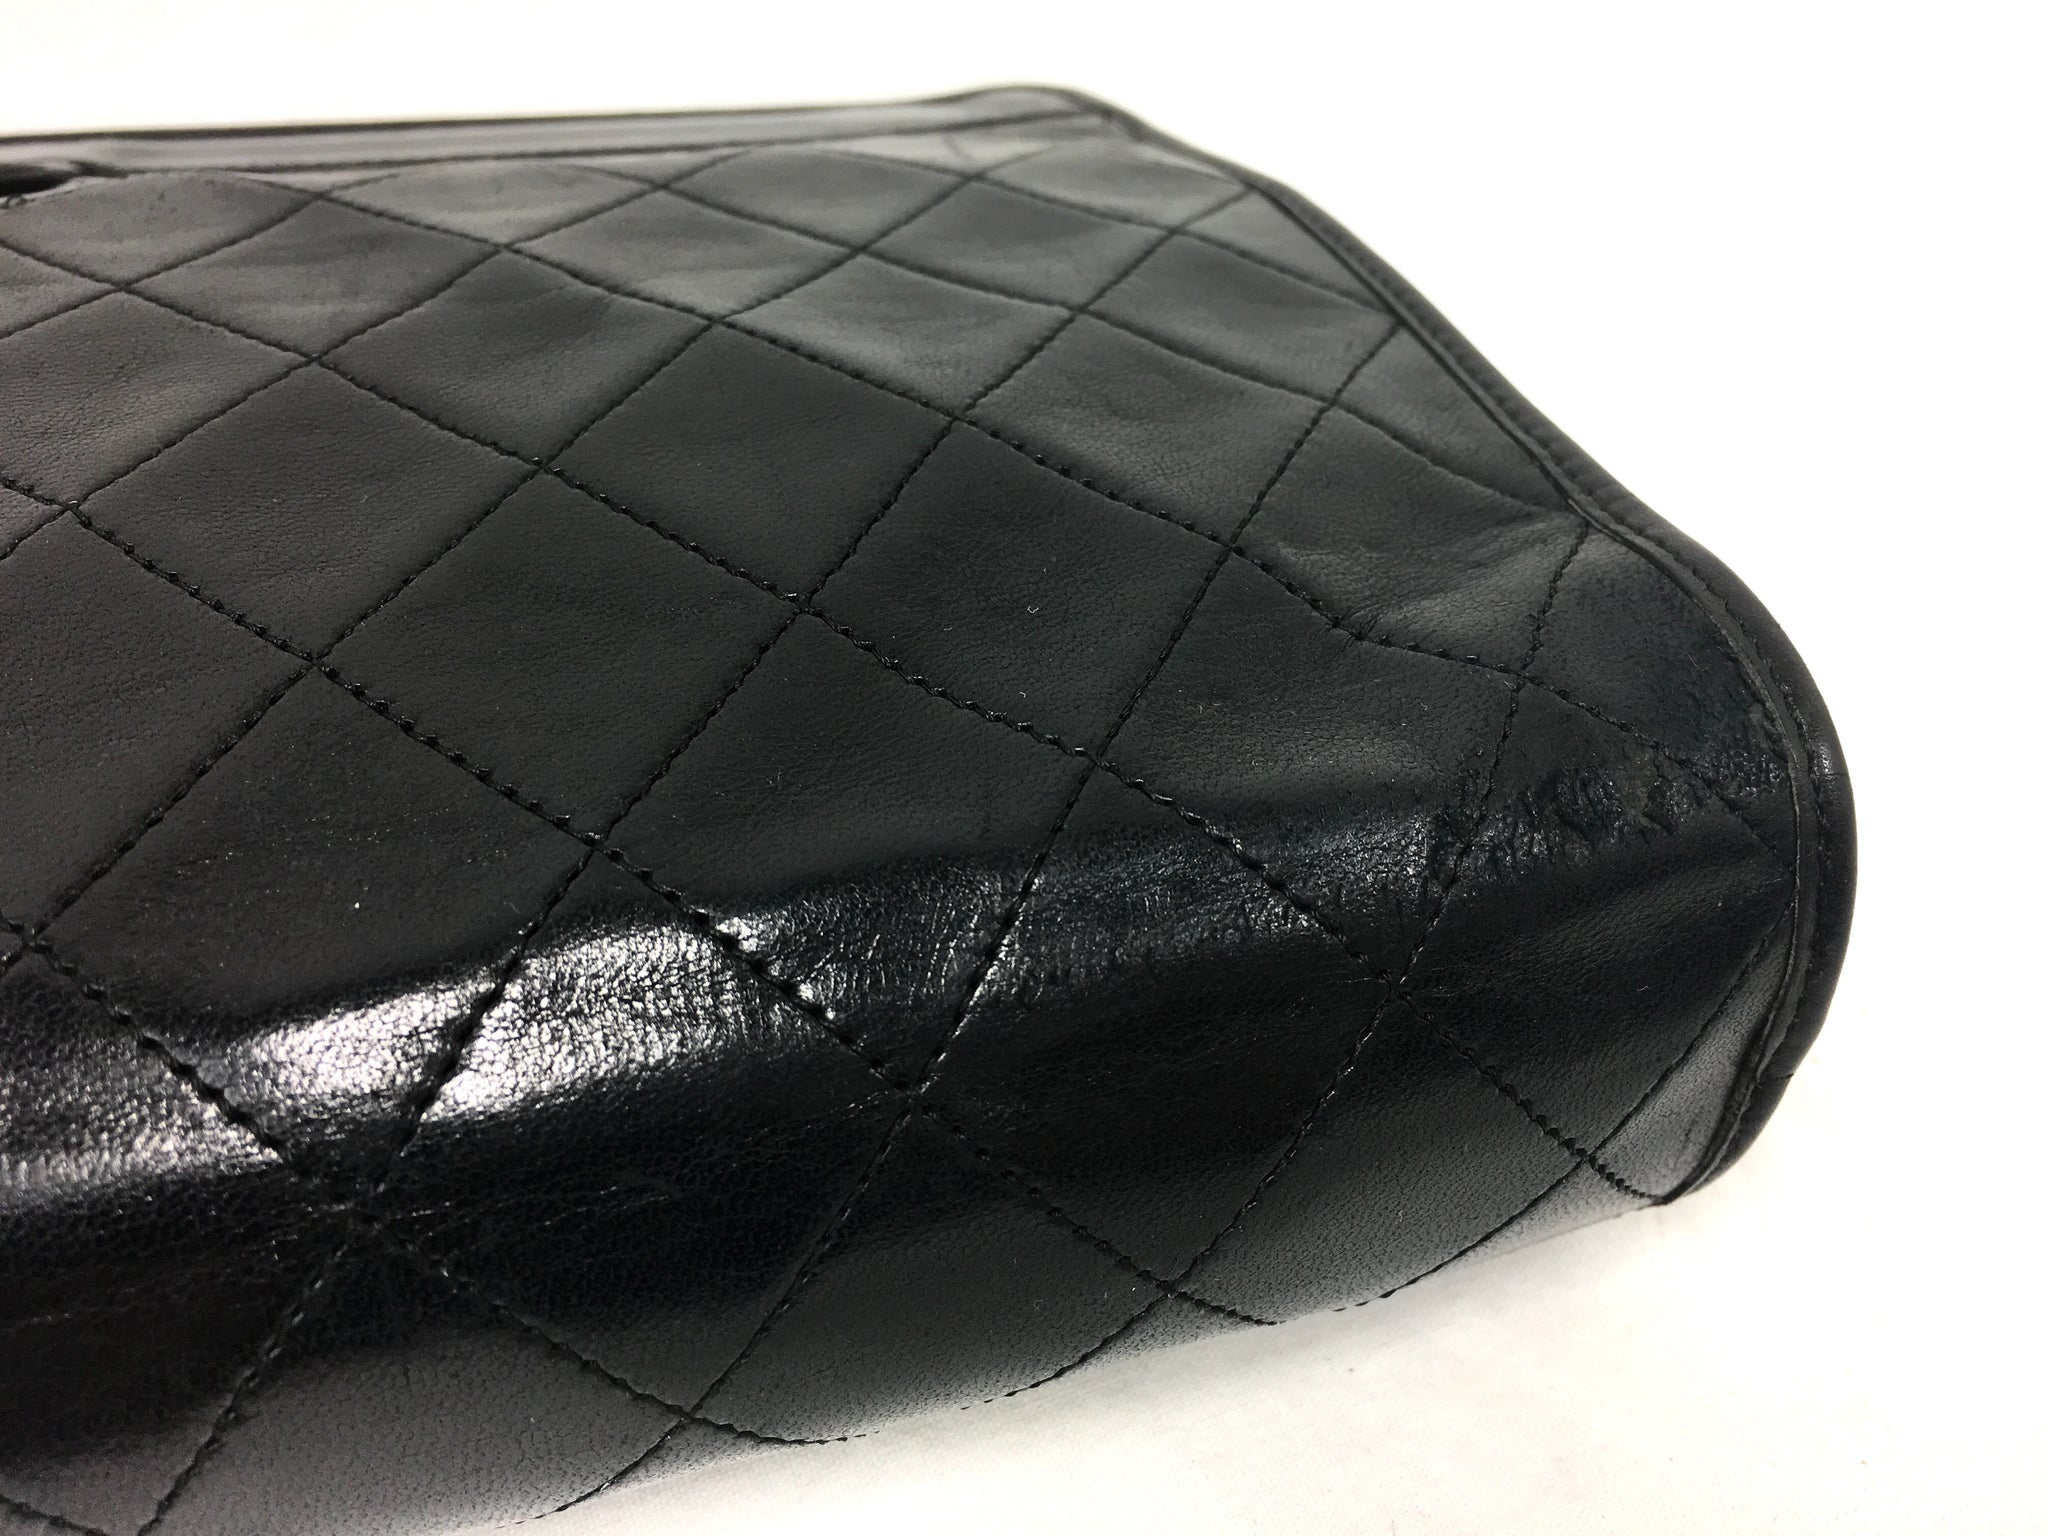 CHANEL Lambskin Black Quilted Evening Clutch